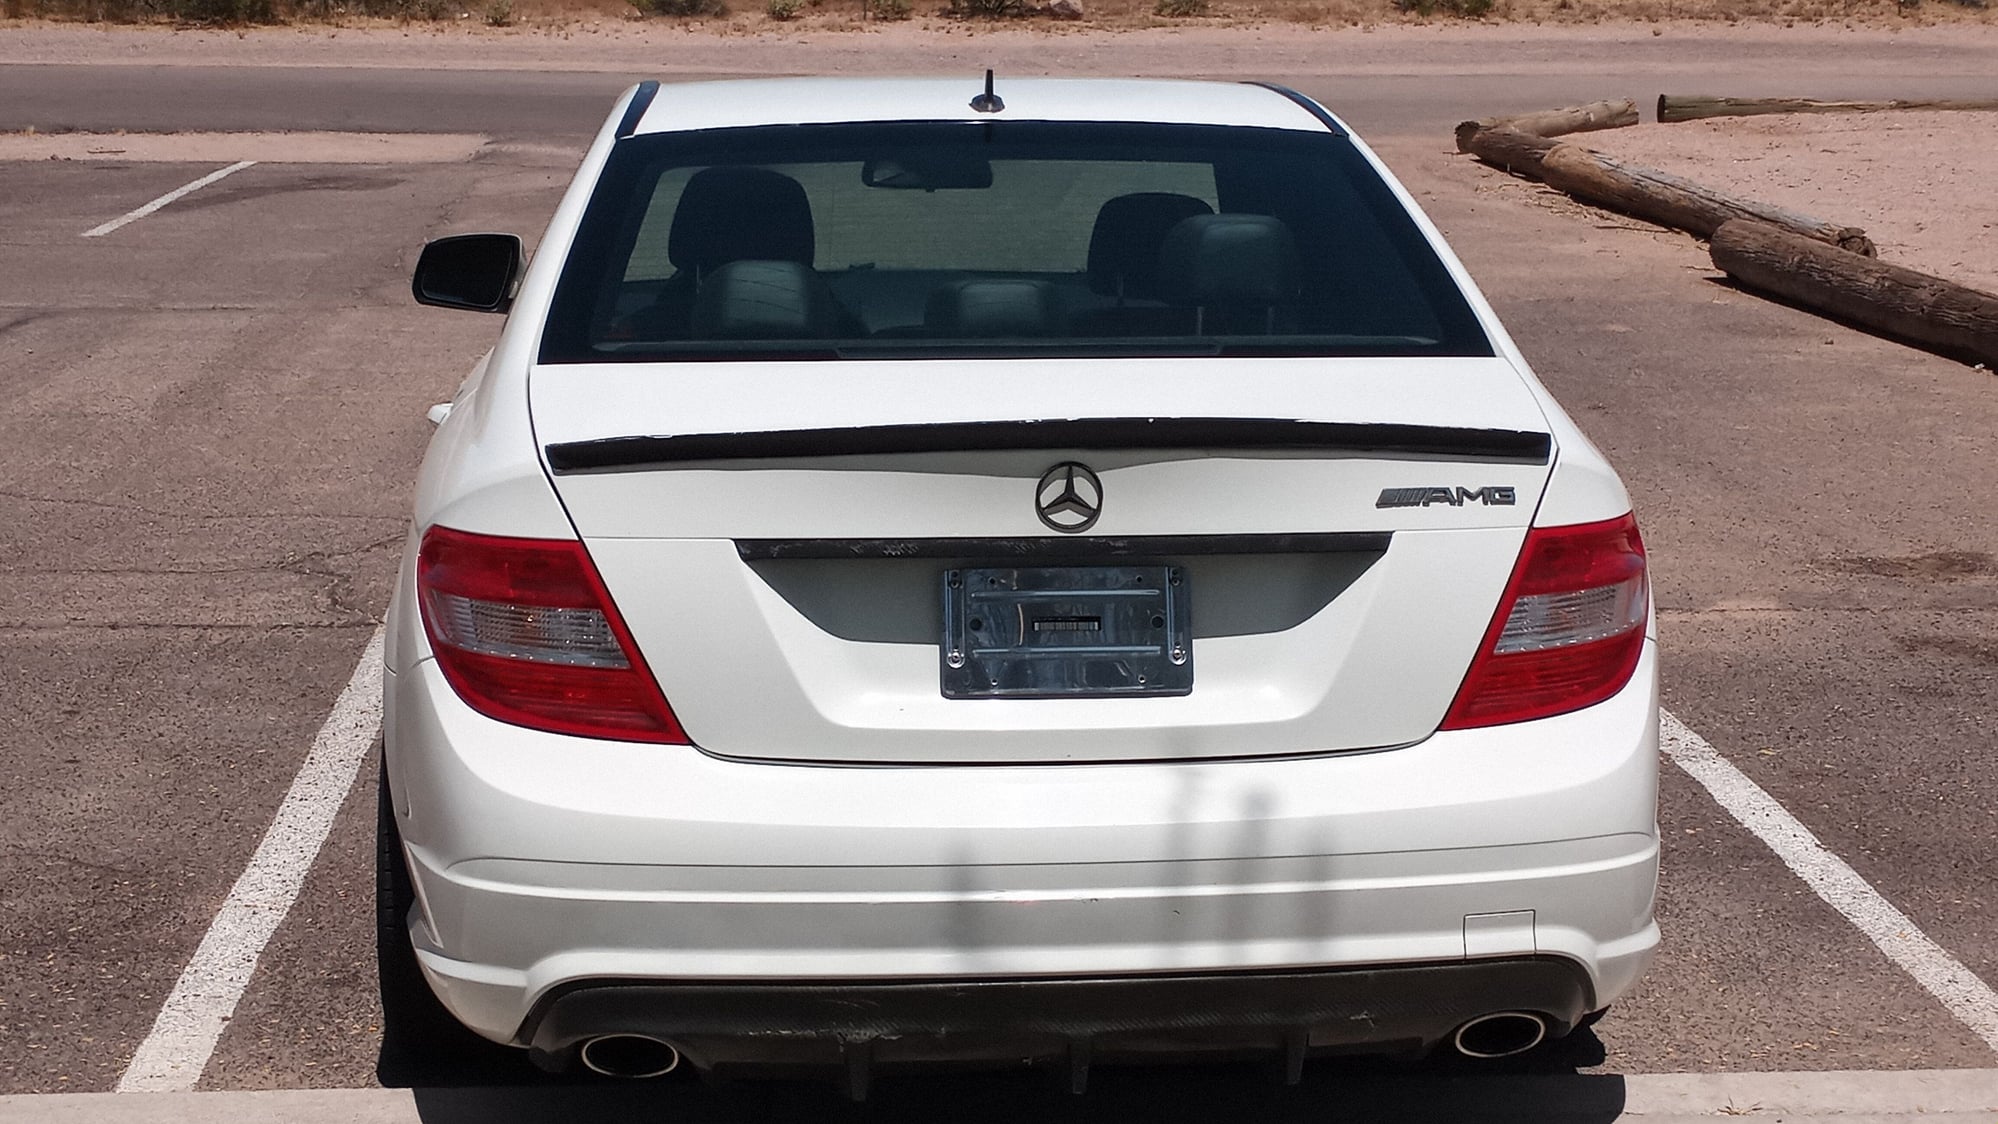 2008 Mercedes-Benz C300 - 2008 C300 Sport with AMG Body Package - Used - VIN WDDGF54X18F032441 - 138,000 Miles - 6 cyl - 2WD - Automatic - Sedan - White - Apache Junction, AZ 85120, United States